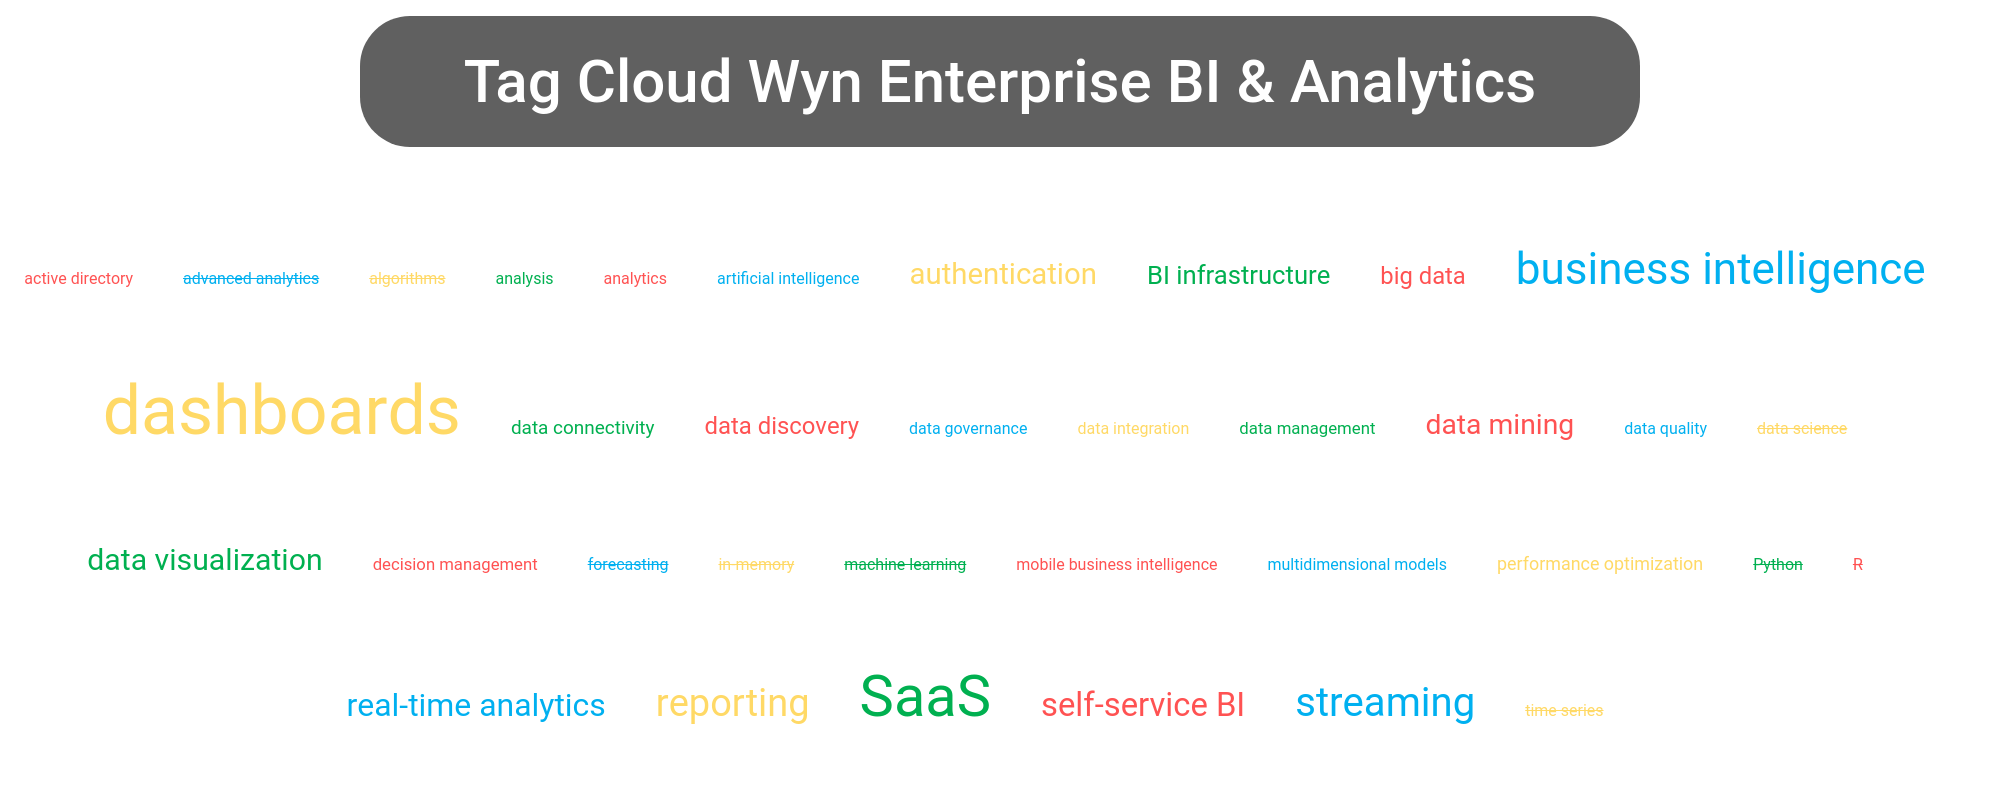 Tag cloud of the Wyn Enterprise Business Intelligence tools.